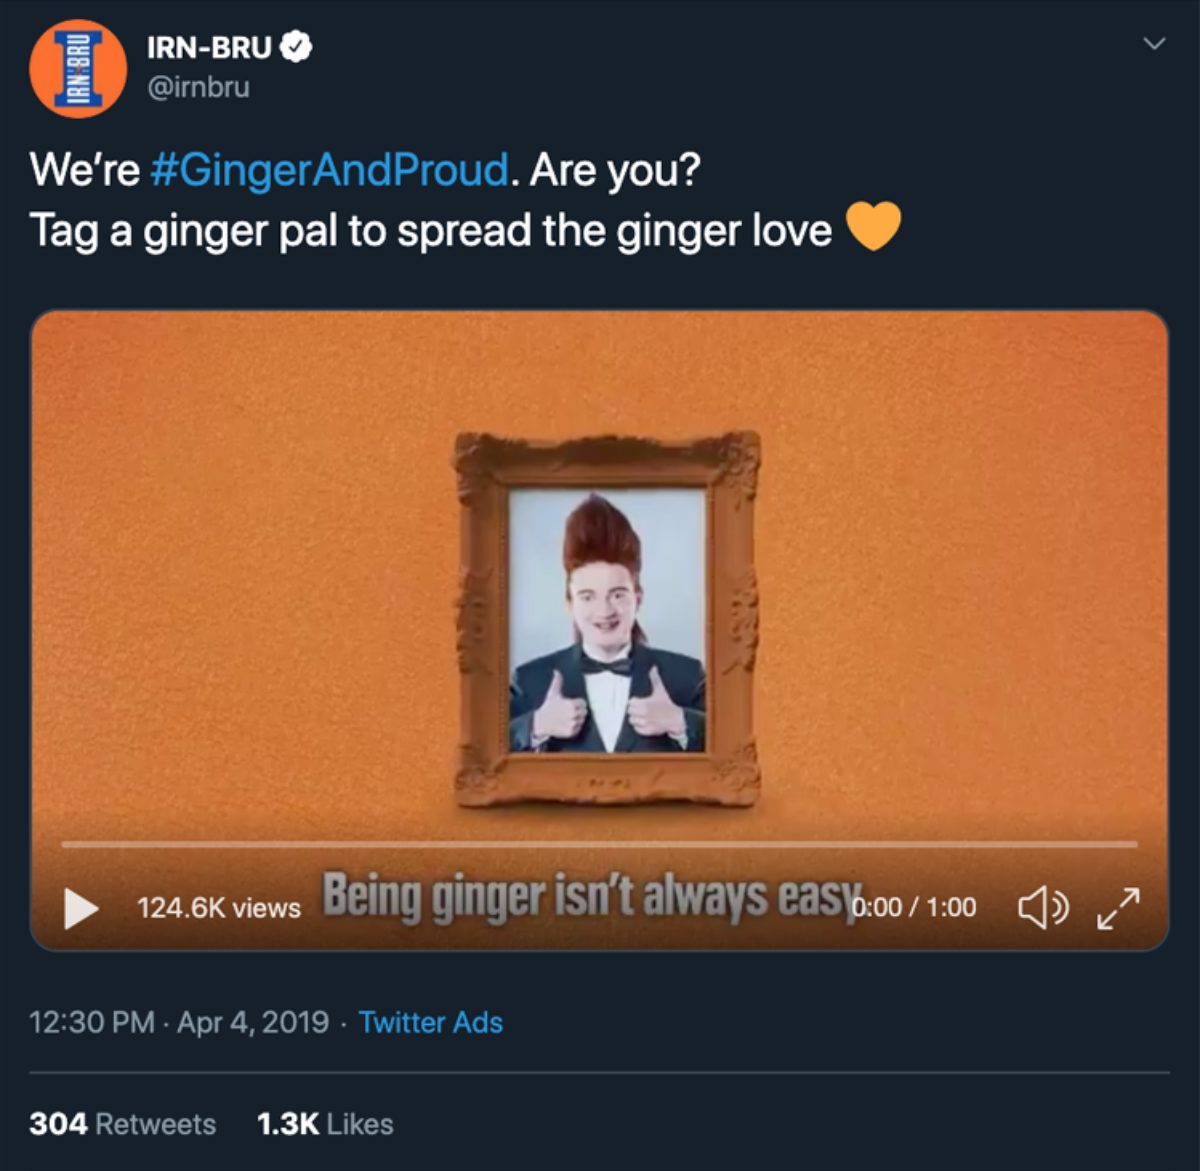 Ginger and Proud